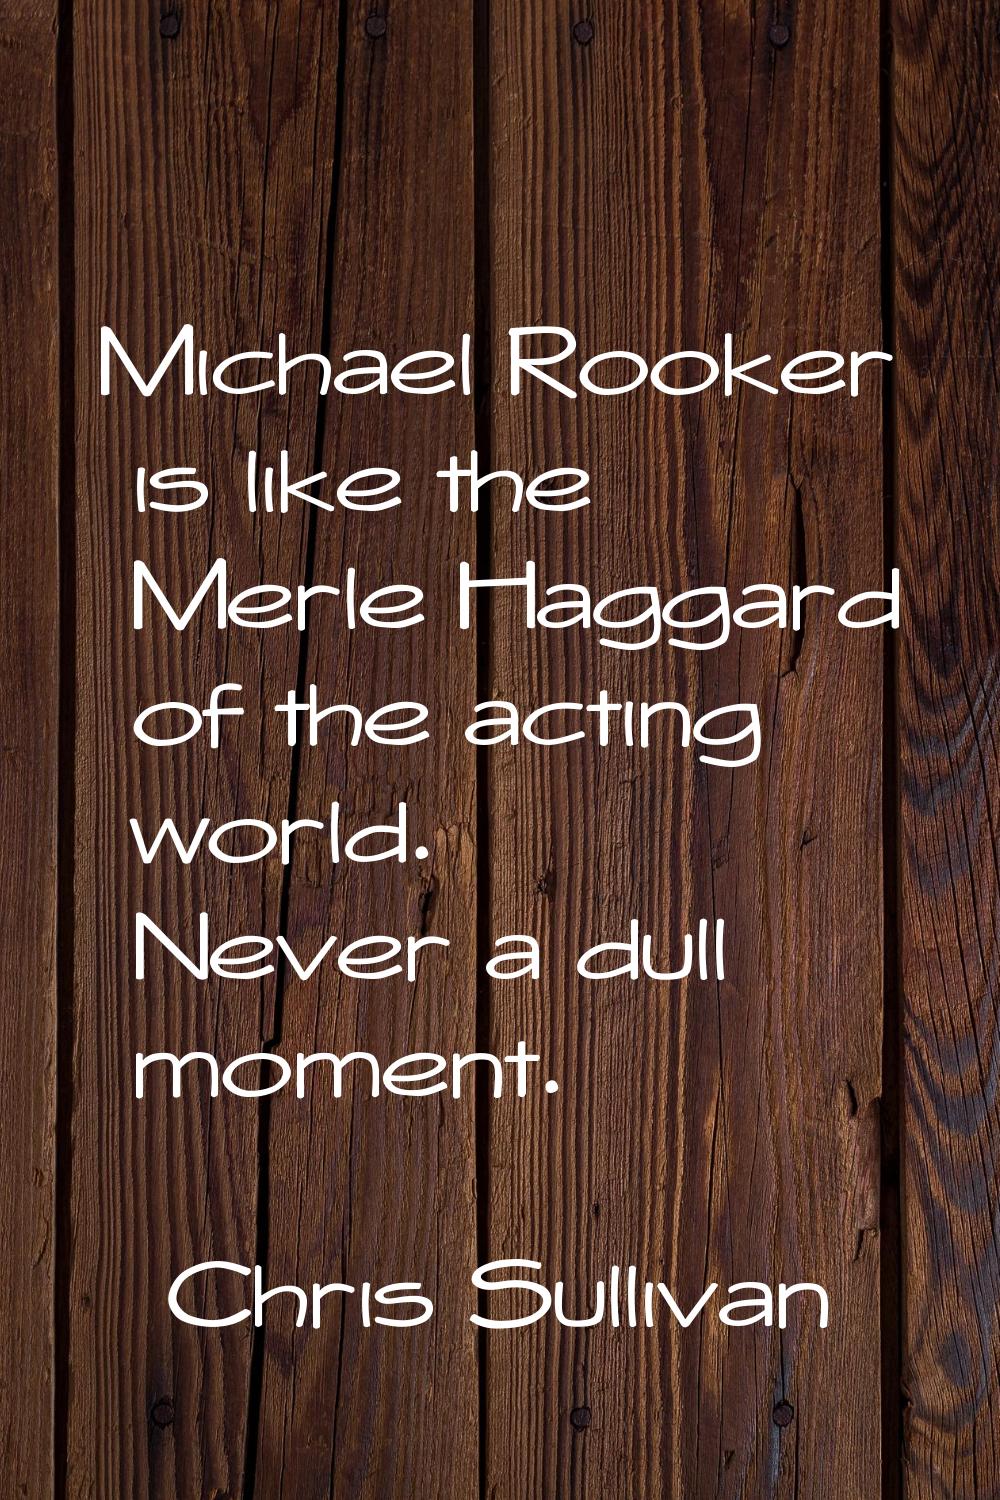 Michael Rooker is like the Merle Haggard of the acting world. Never a dull moment.